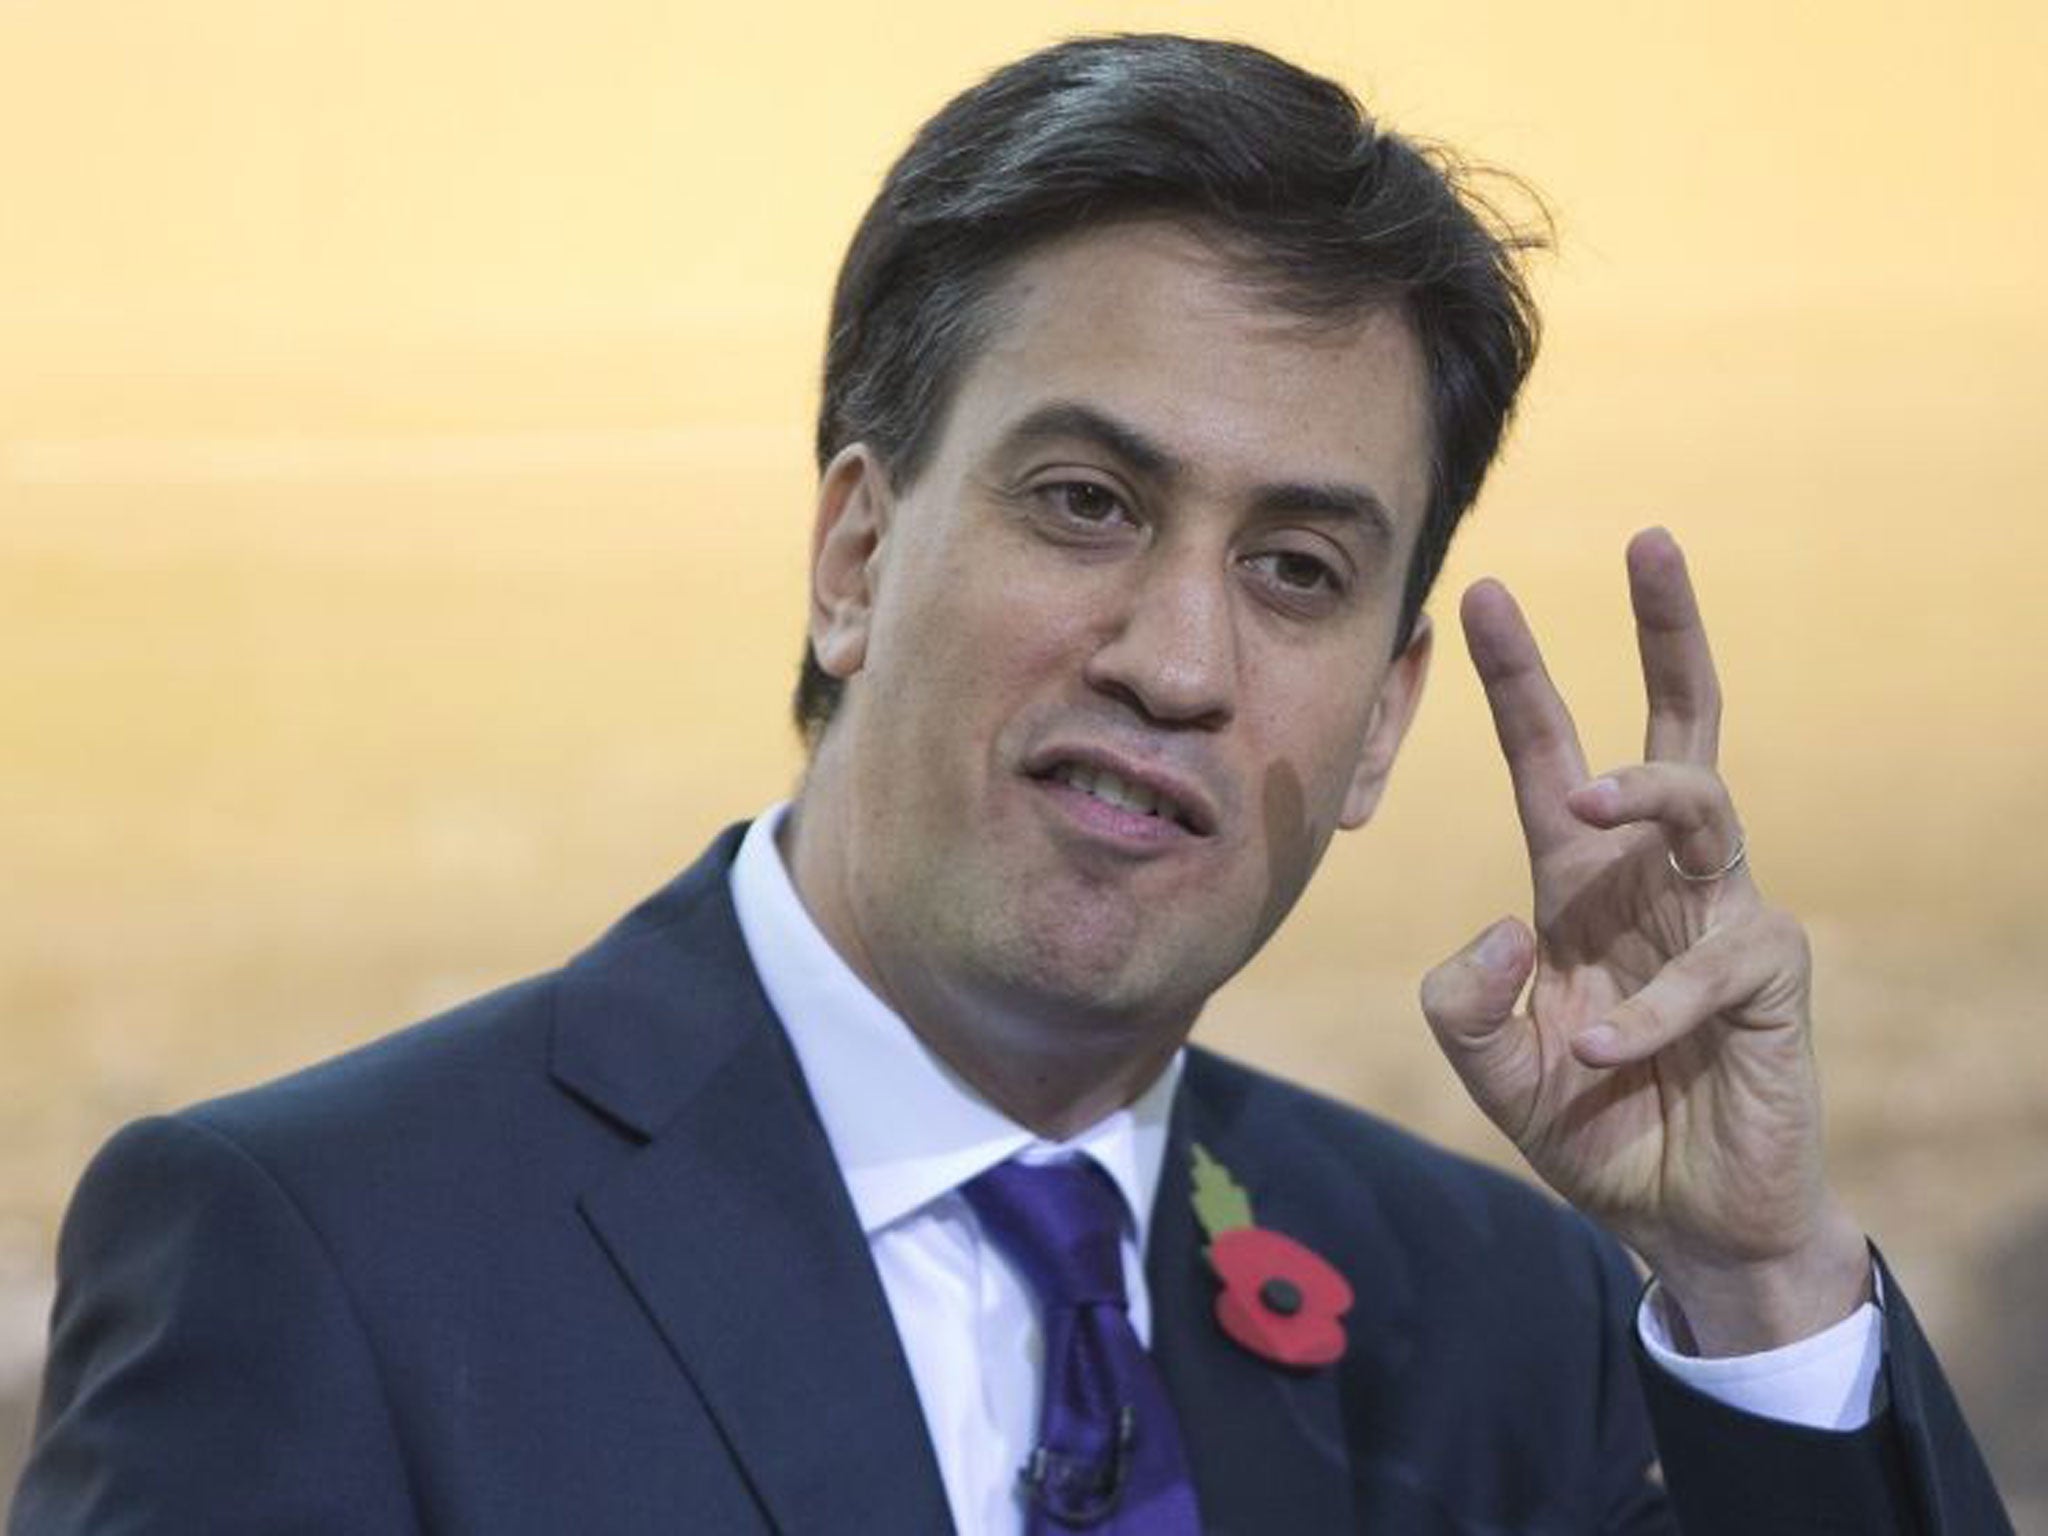 David Schneider has said that more people would vote for Ed Miliband if he was better looking